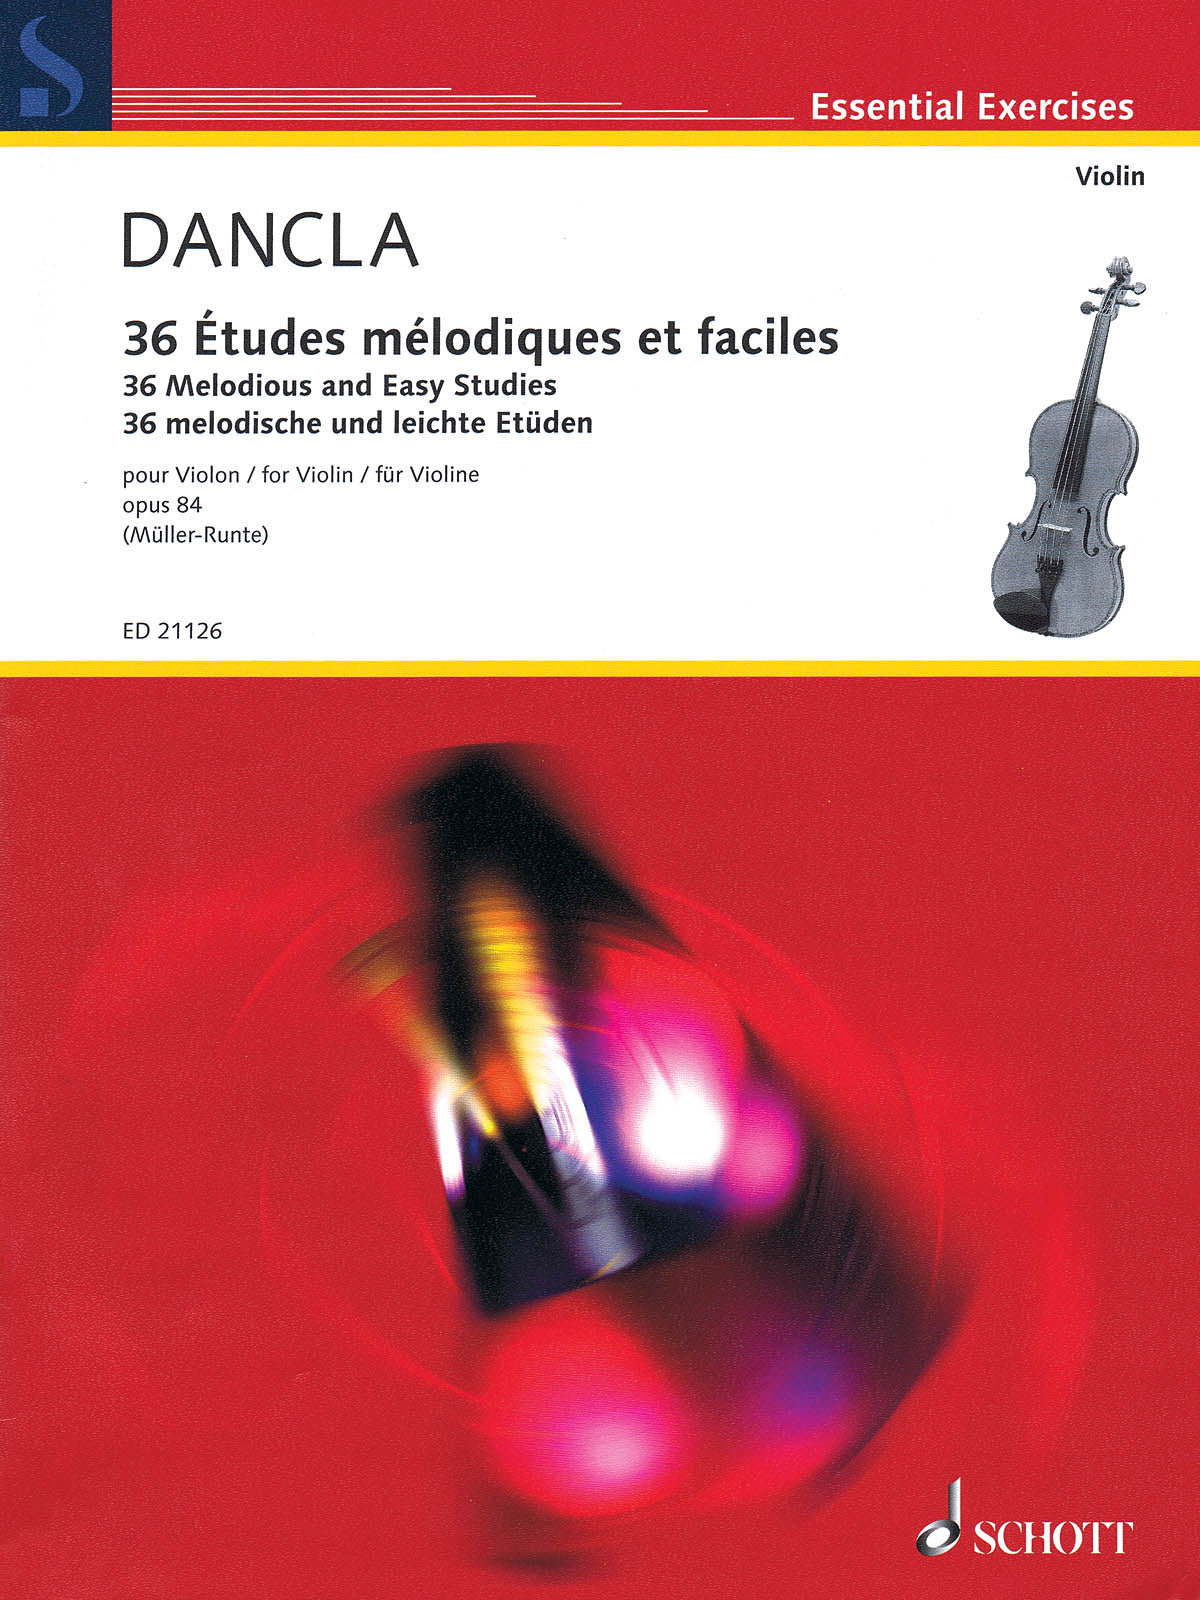 Dancla: 36 Melodious and Easy Studies, Op. 84